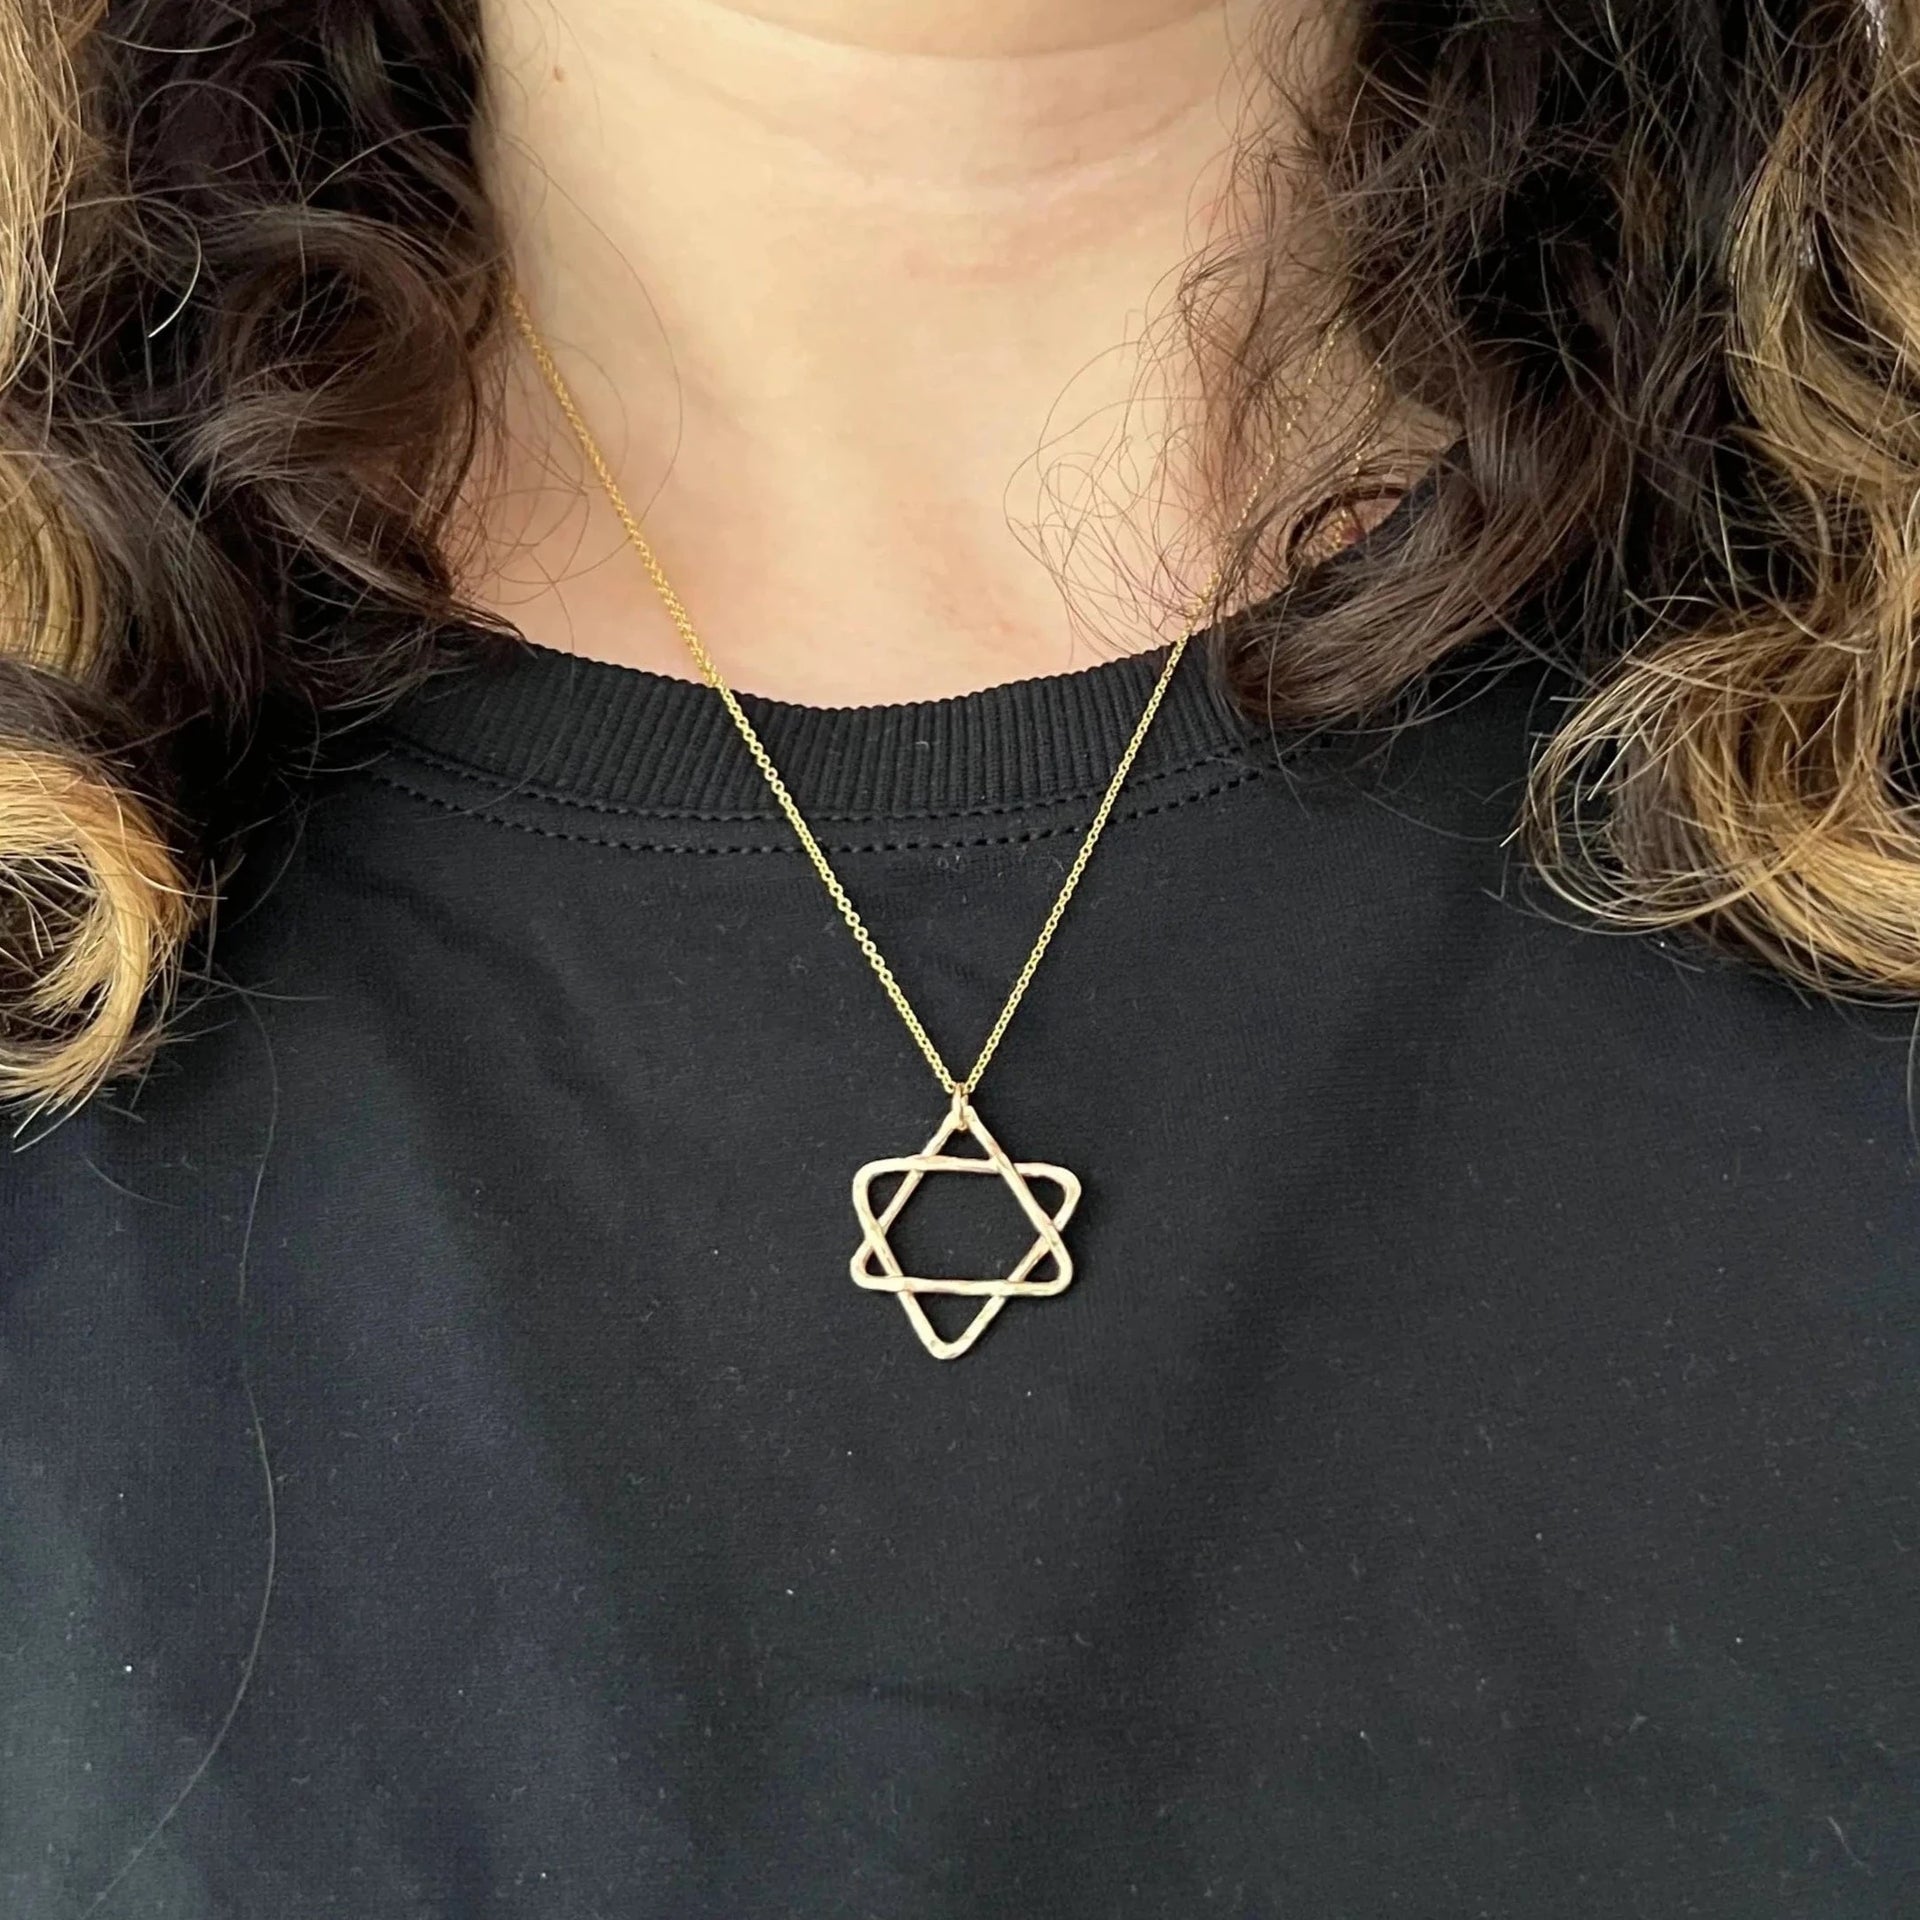 Rachel Pfeffer Necklaces Small Pendant on 18" Chain Gold-Plated Handmade Organic Star of David - (Small or Large)